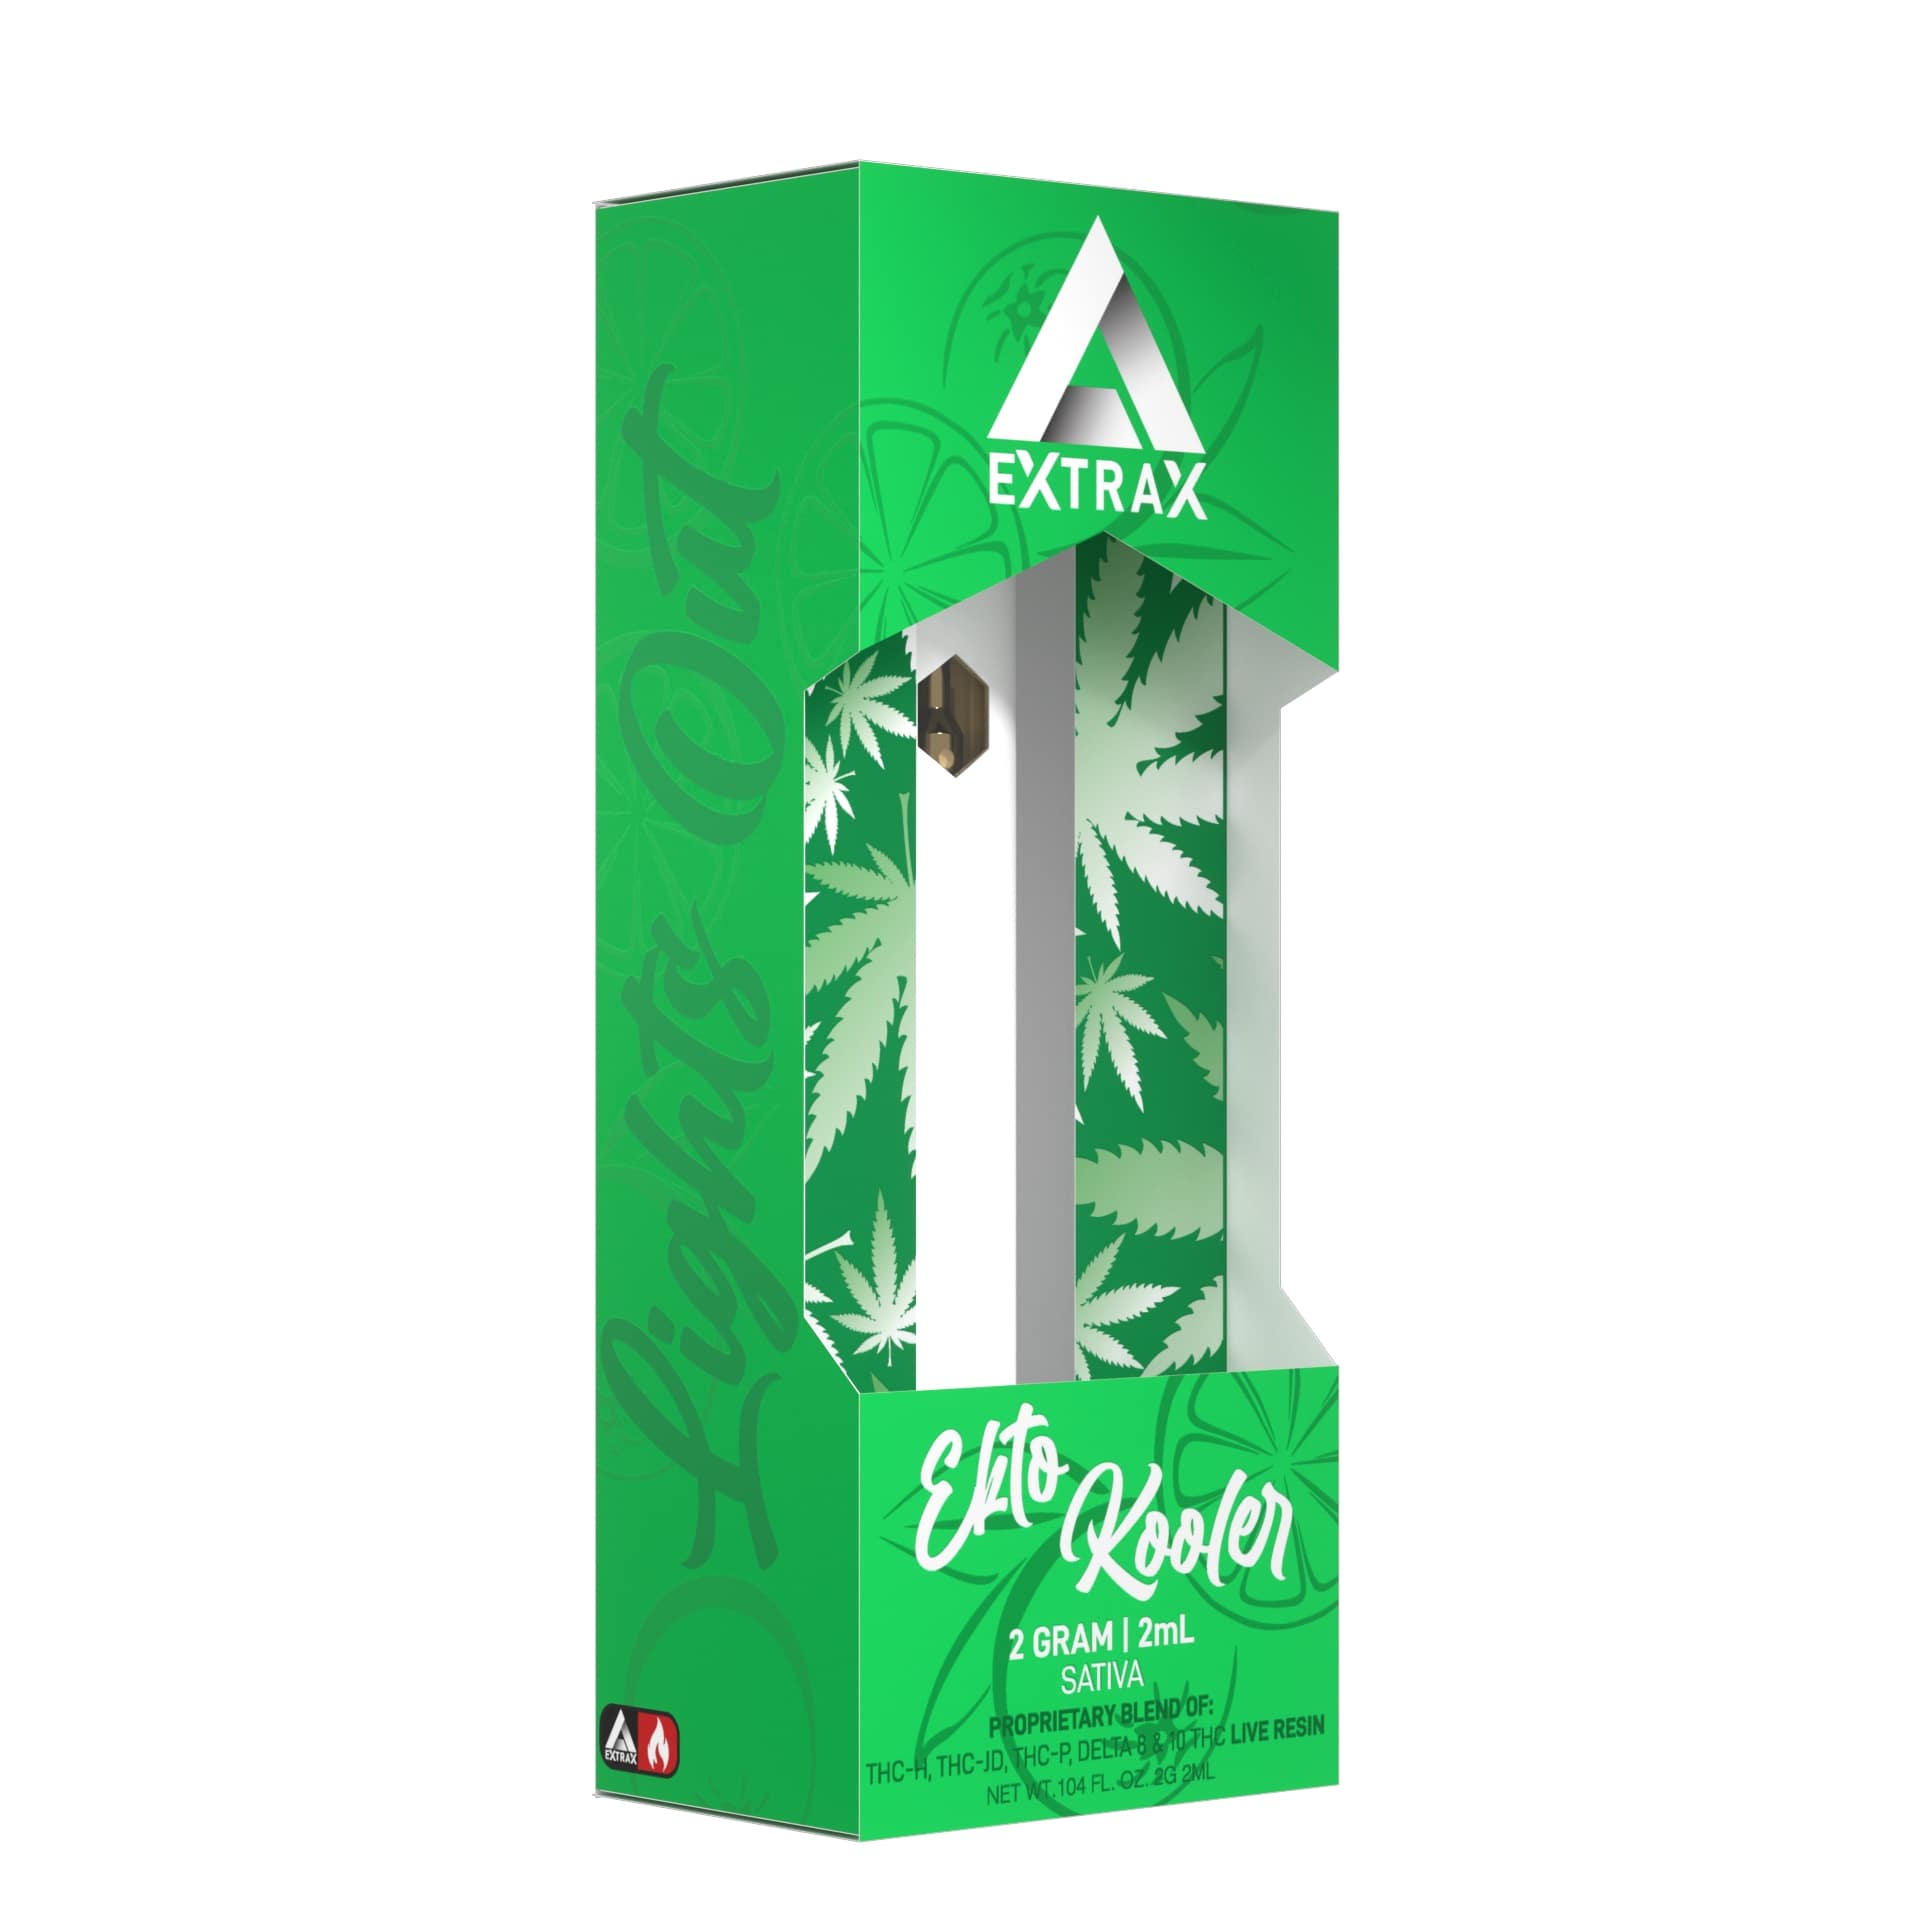 Wholesale Extrax Lights Out 2 Gram Thch Thcjd Disposable – Live Resin - Pack Of 06